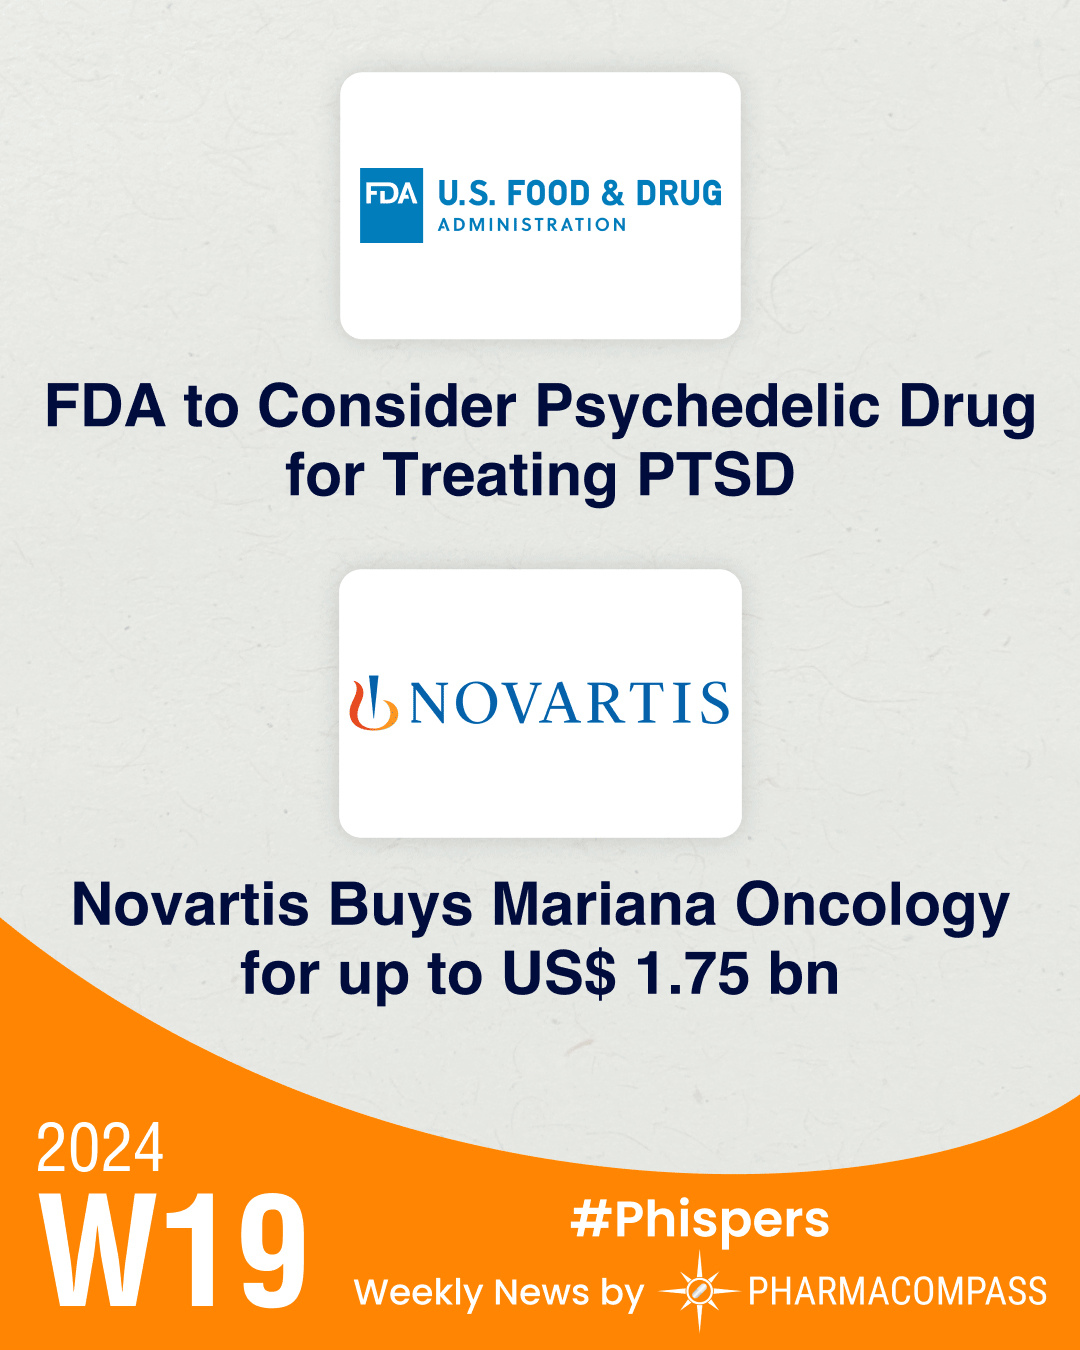 FDA to consider psychedelic-assisted drug for treating PTSD; Novartis buys Mariana Oncology for up to US$ 1.75 bn